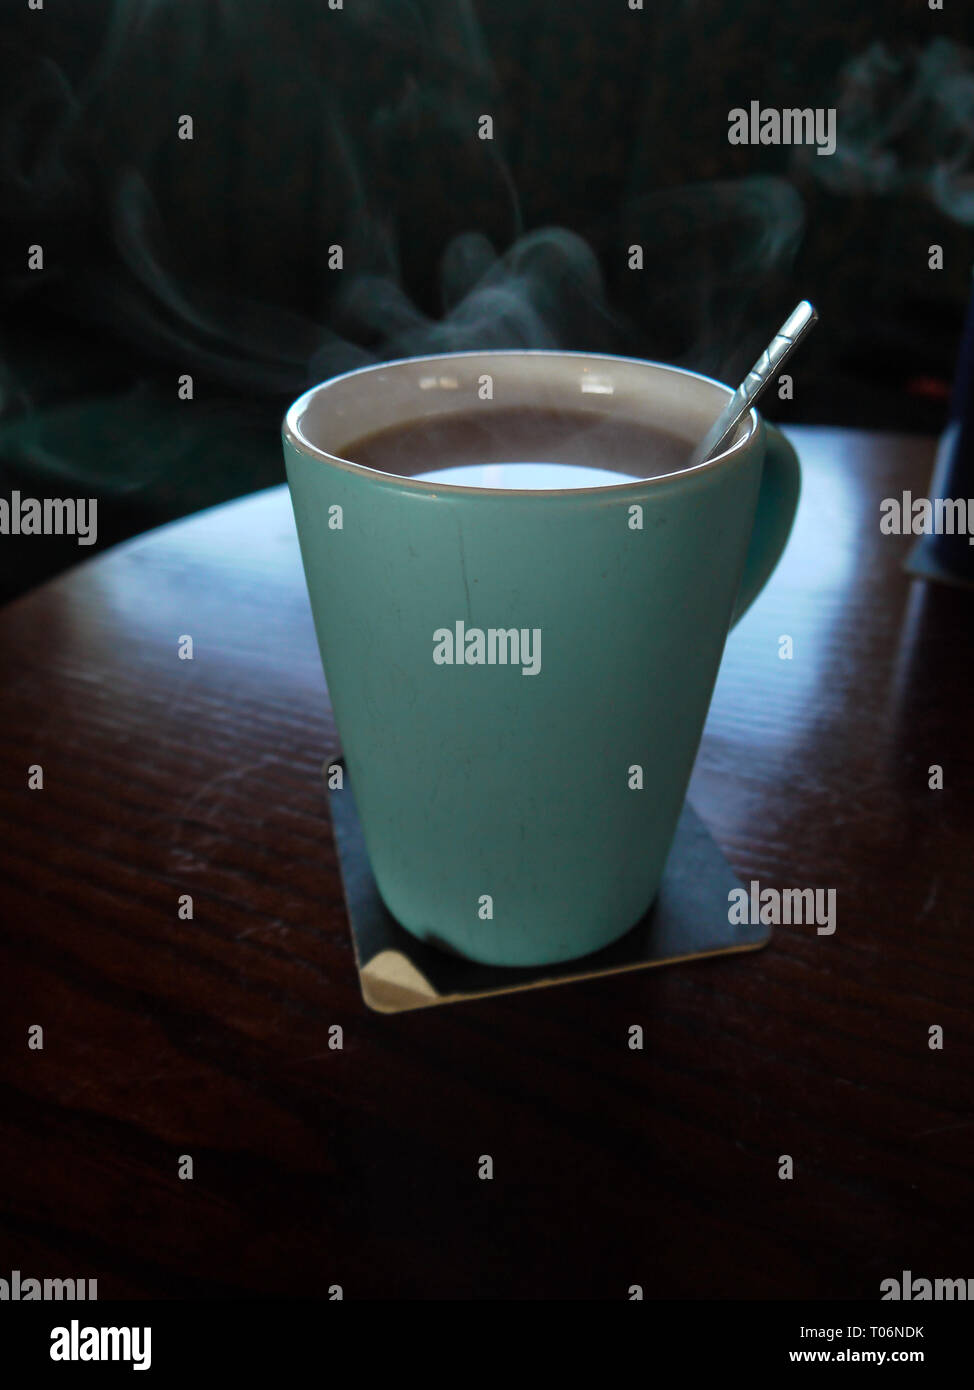 https://c8.alamy.com/comp/T06NDK/mug-of-hot-teacoffee-on-a-table-in-a-cafepub-T06NDK.jpg